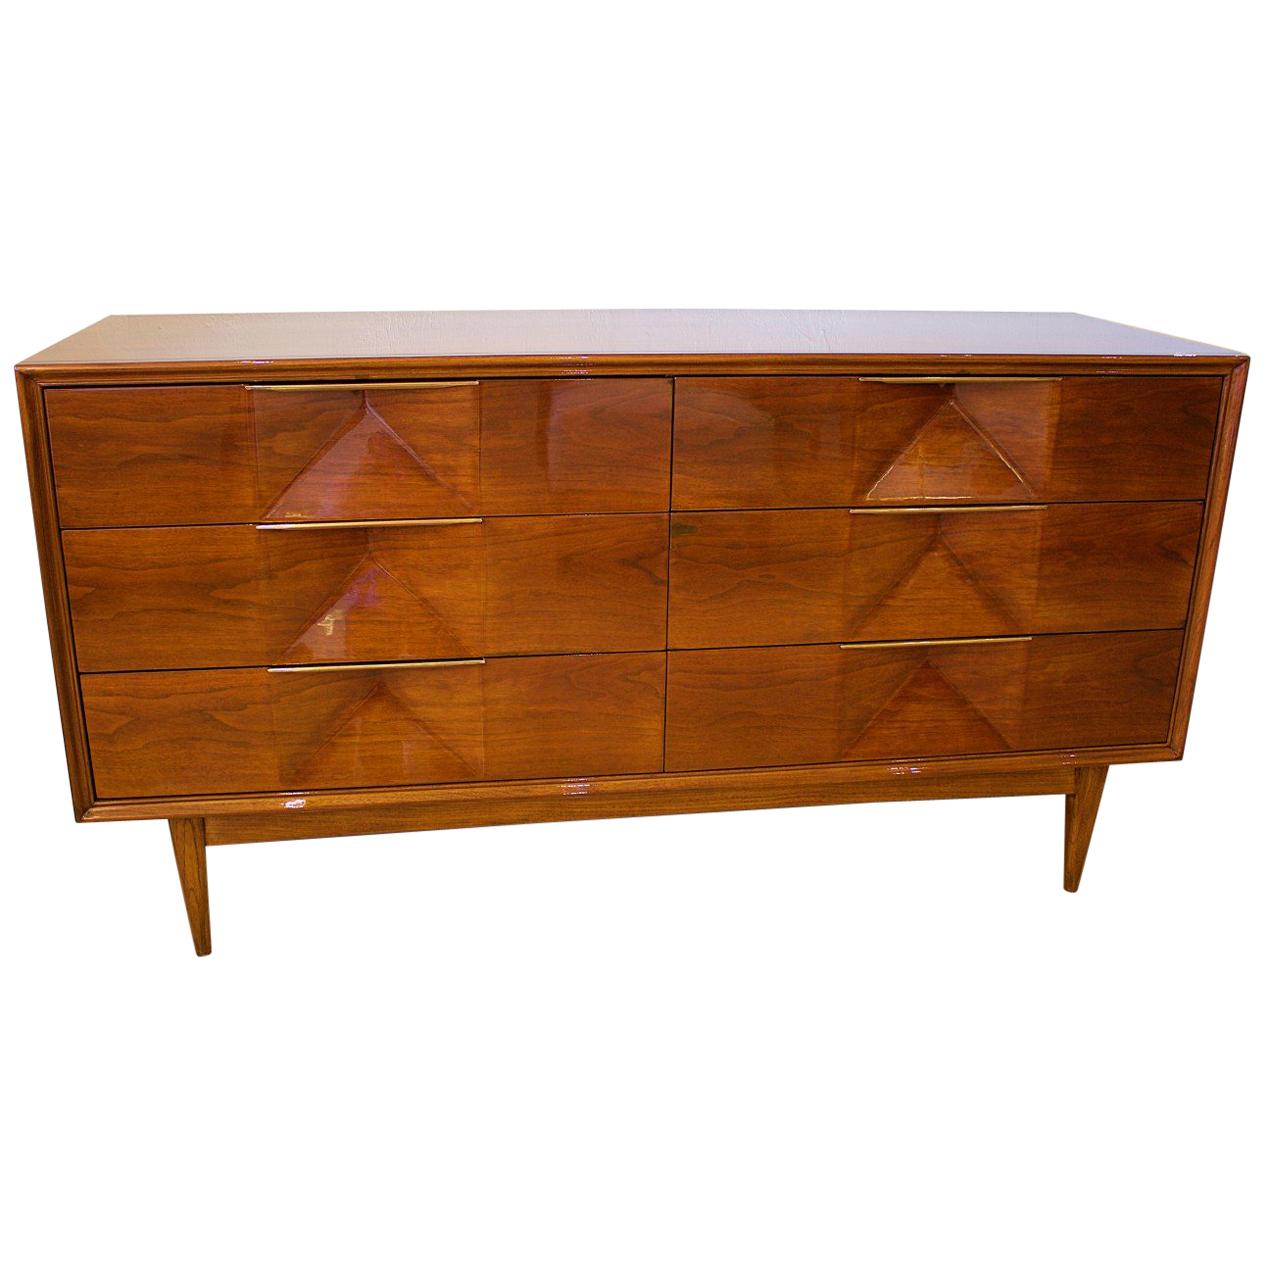 American Modern Walnut and Brass Chest of Drawers, American of Martinsville